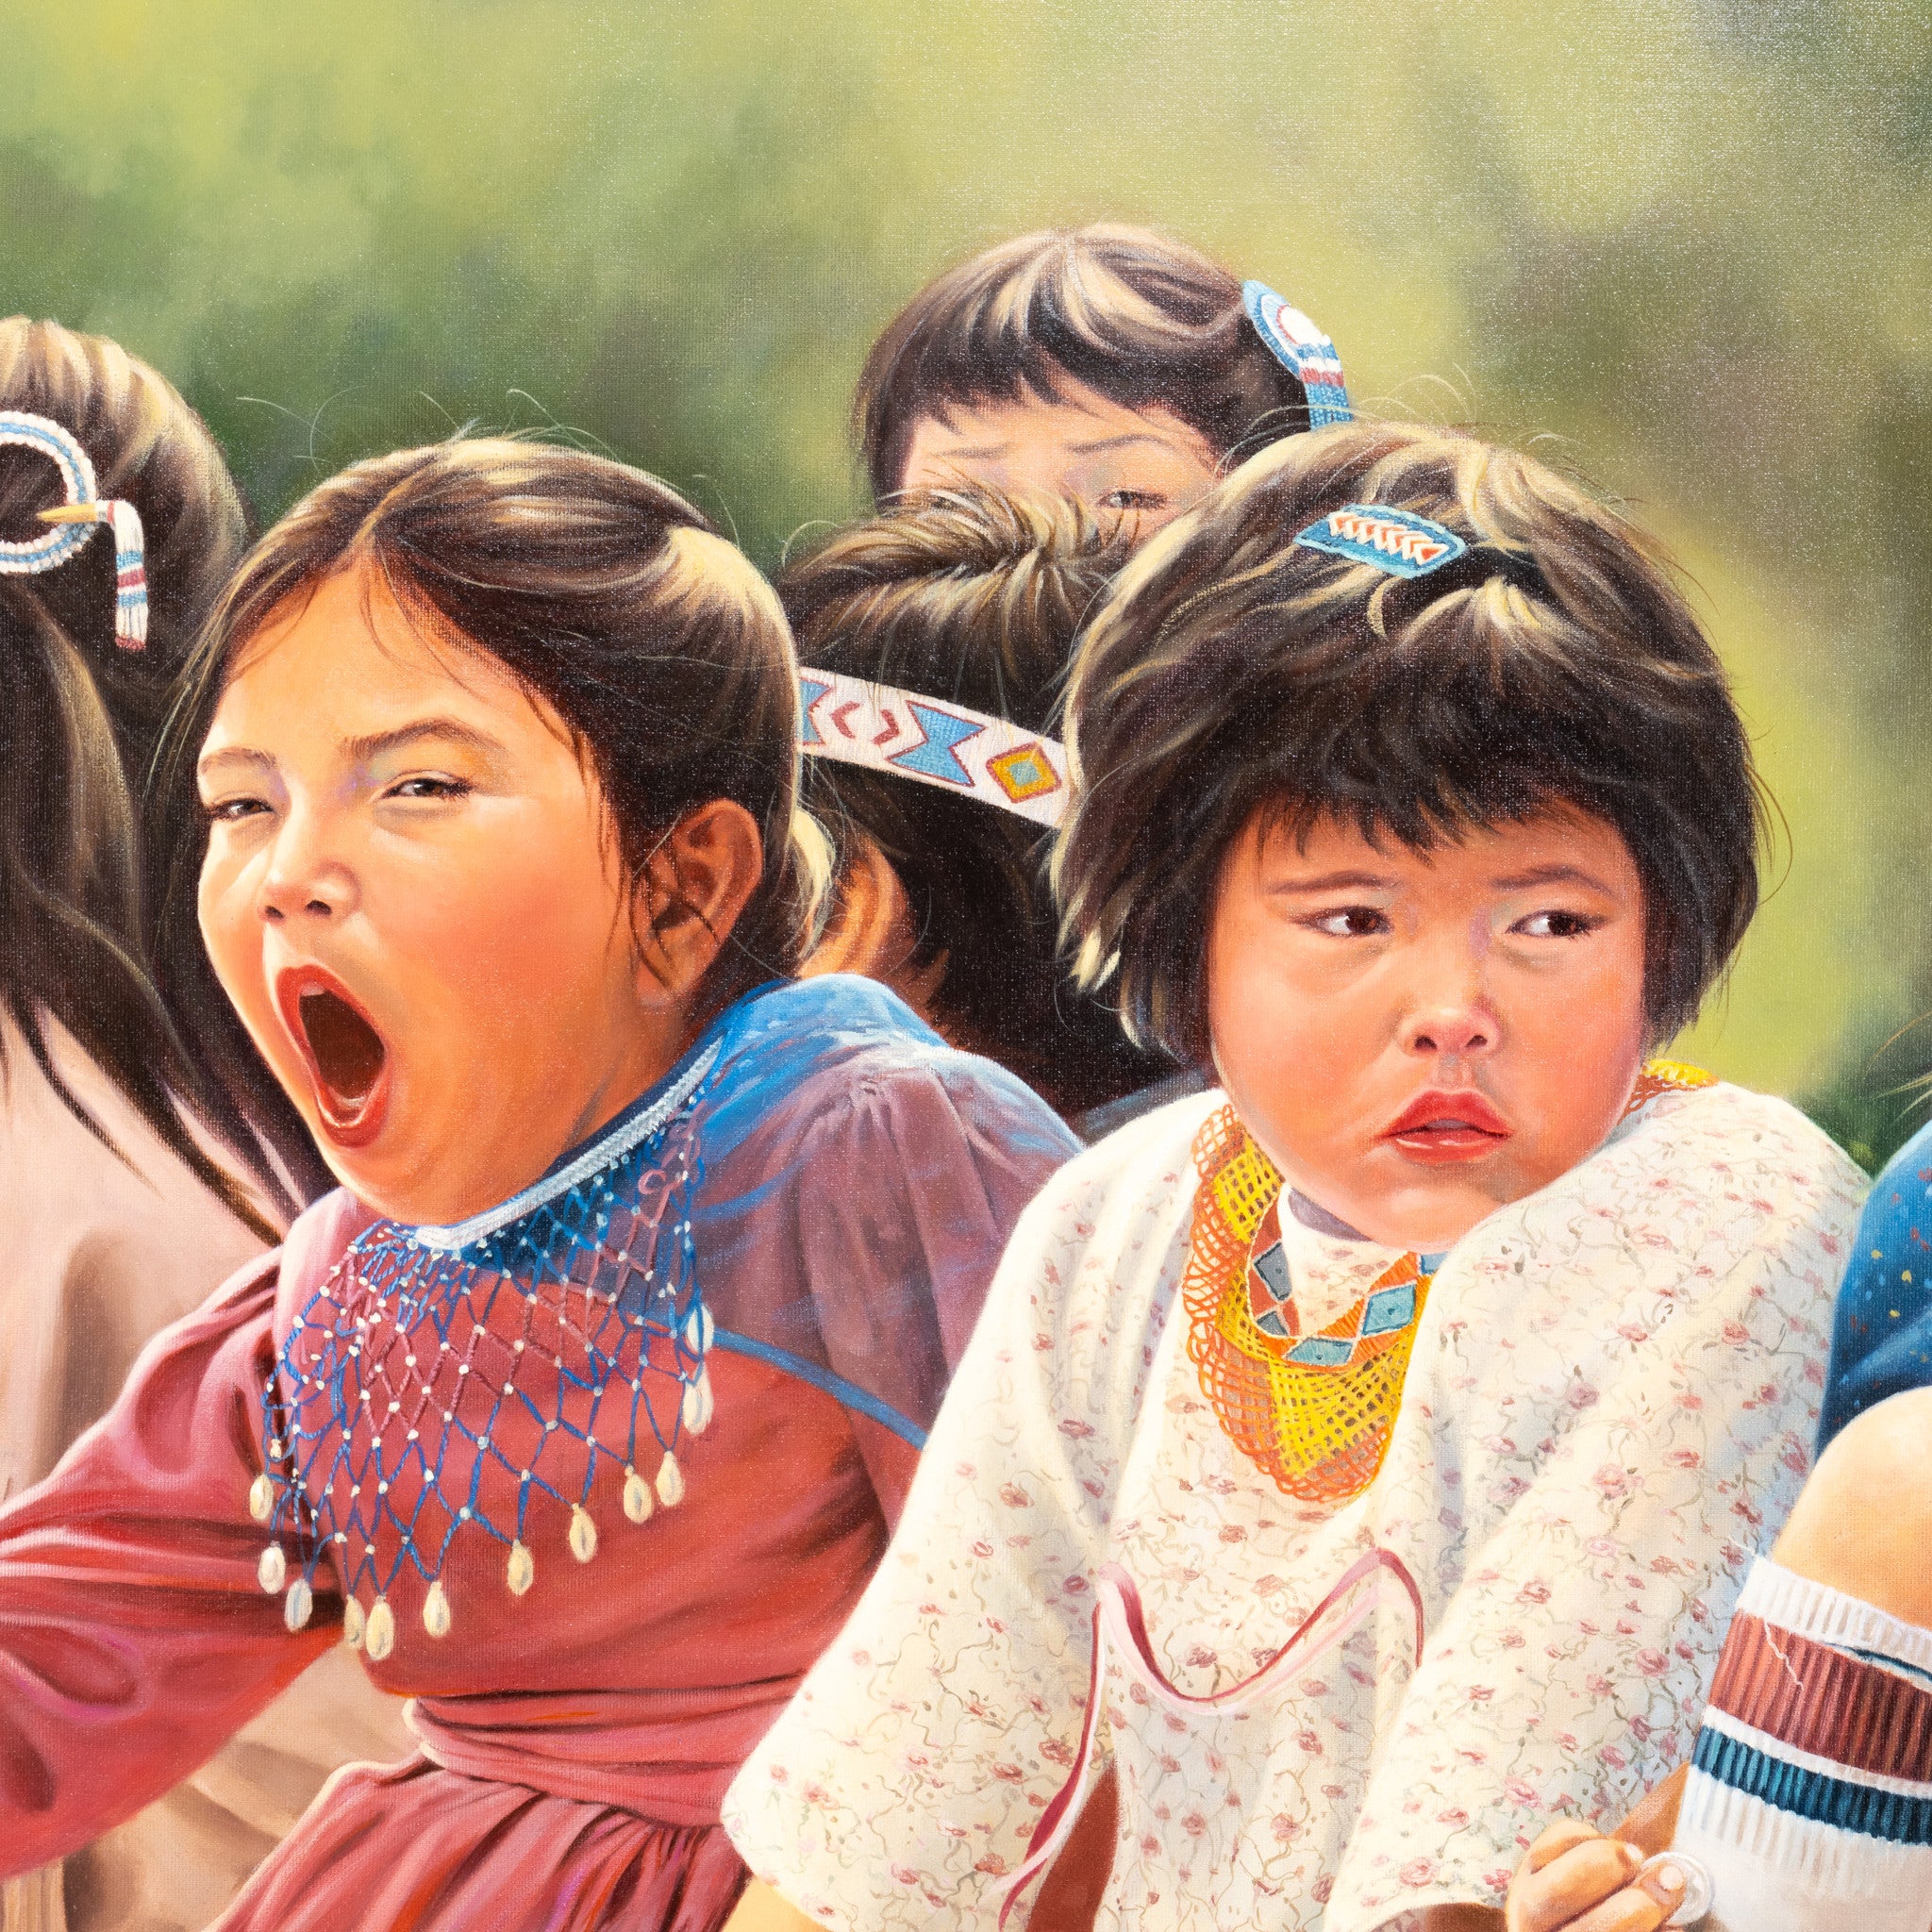 Paiute Children by Sherry Gallagher